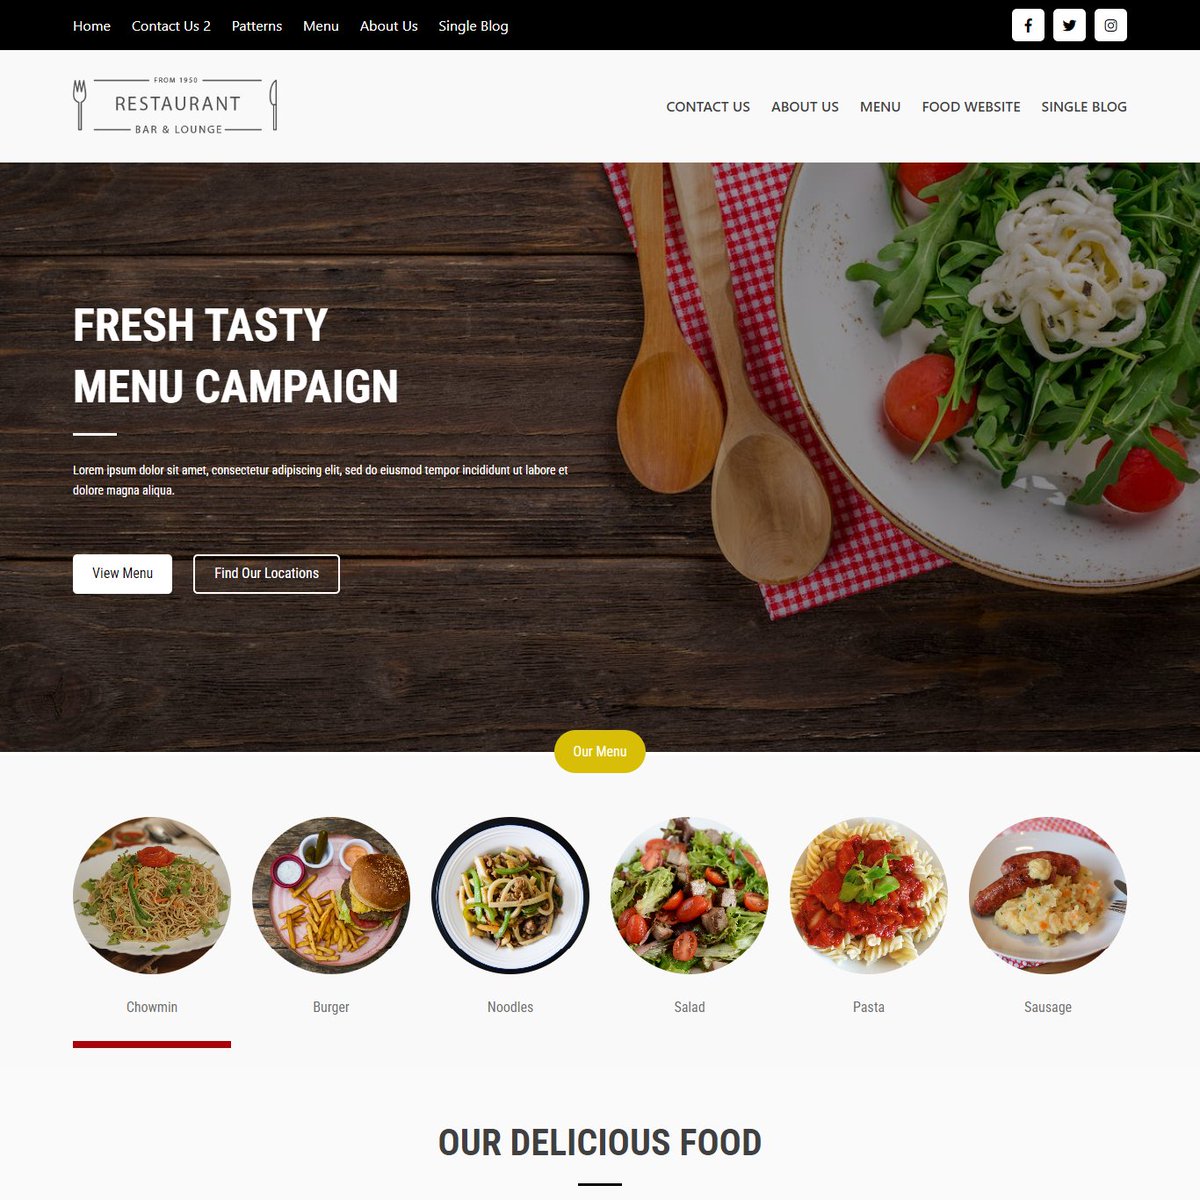 Serve up success with our tantalizing WordPress restaurant website template! Elevate your online presence and satisfy your visitors' appetites for great design. 🍽️🌟 
Discover the Future of Website Design with Blockspare: blockspare.com
#restaurantwebtemplate #WordPress